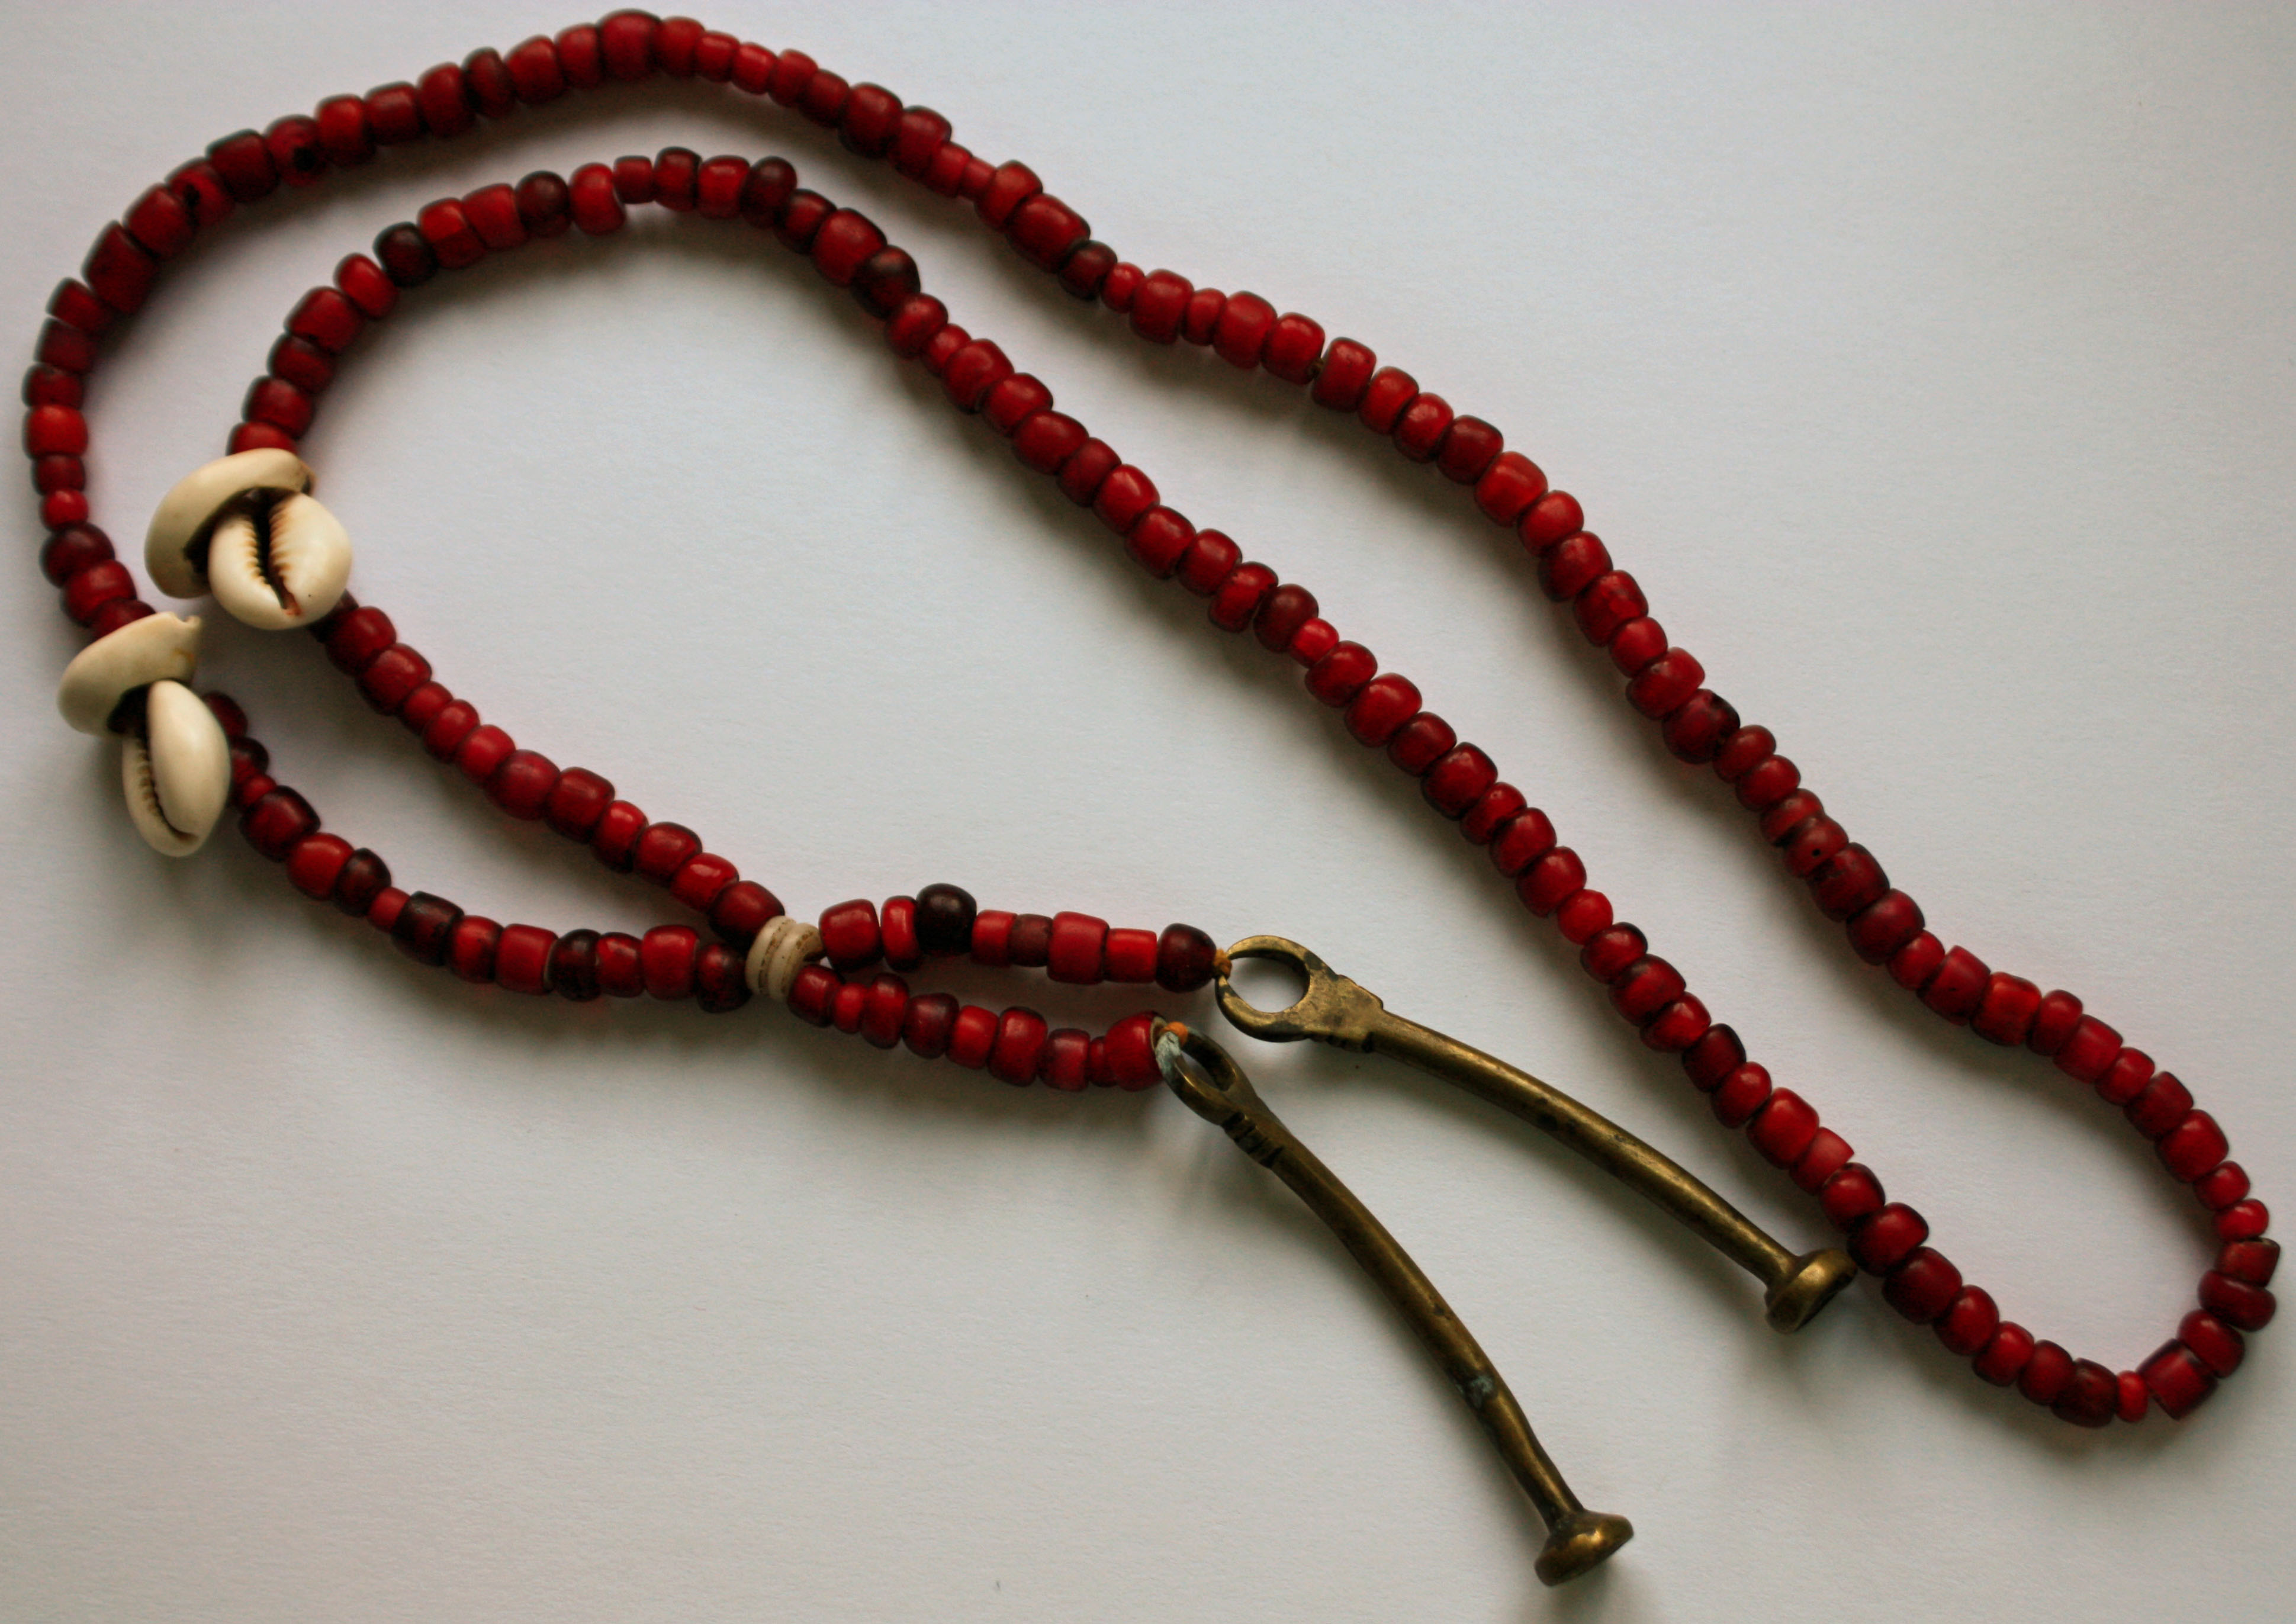 Friend's Great Grandmother's Red Bead Necklace – Where is it From?